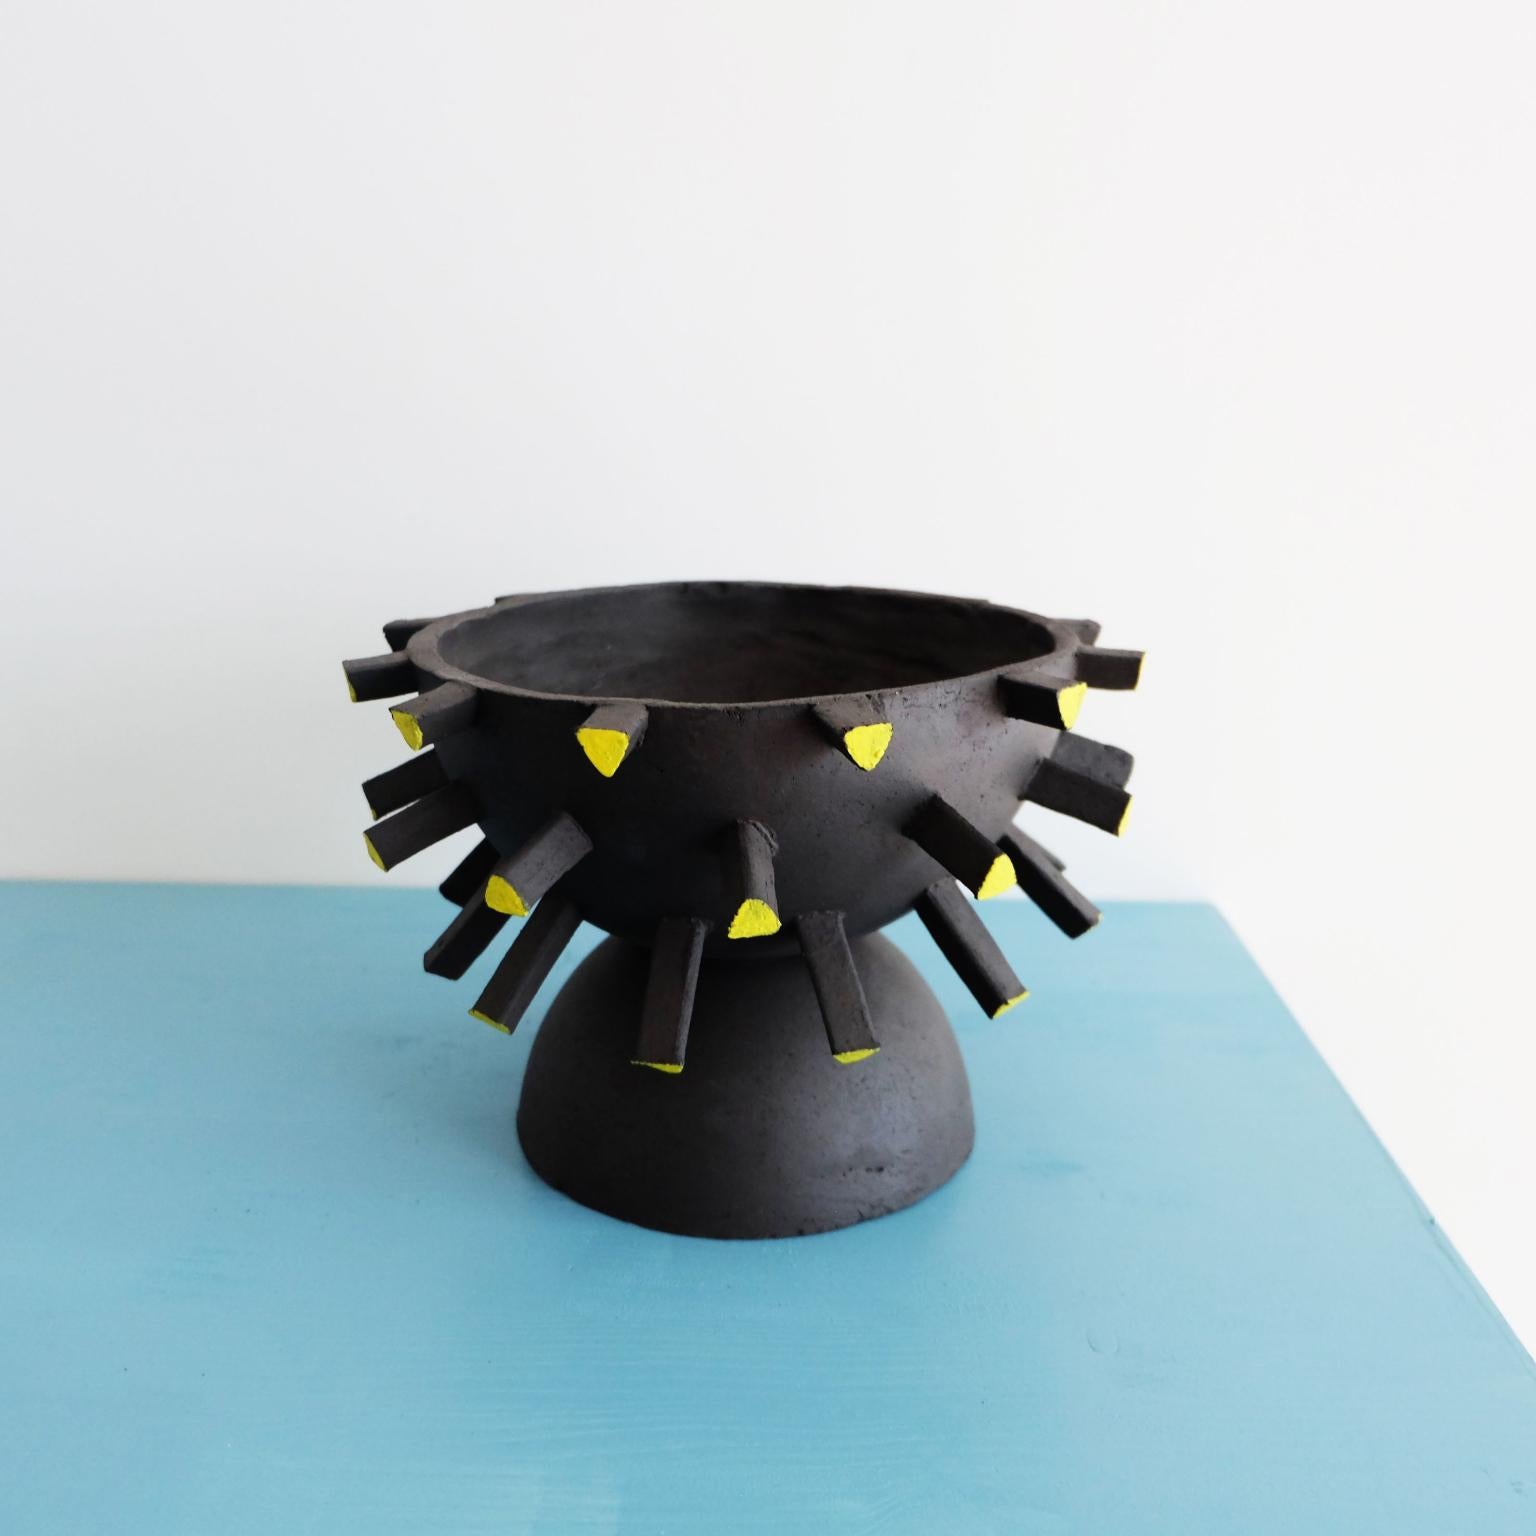 Sculptural Pluri bowl by Ia Kutateladze
Dimensions: W 23 x H 15 cm
Materials: Raw Black Clay
“Playground For Salvation” was created entirely during quarantine, in my Berlin studio. The stillness of the lockdown enabled me to experiment and